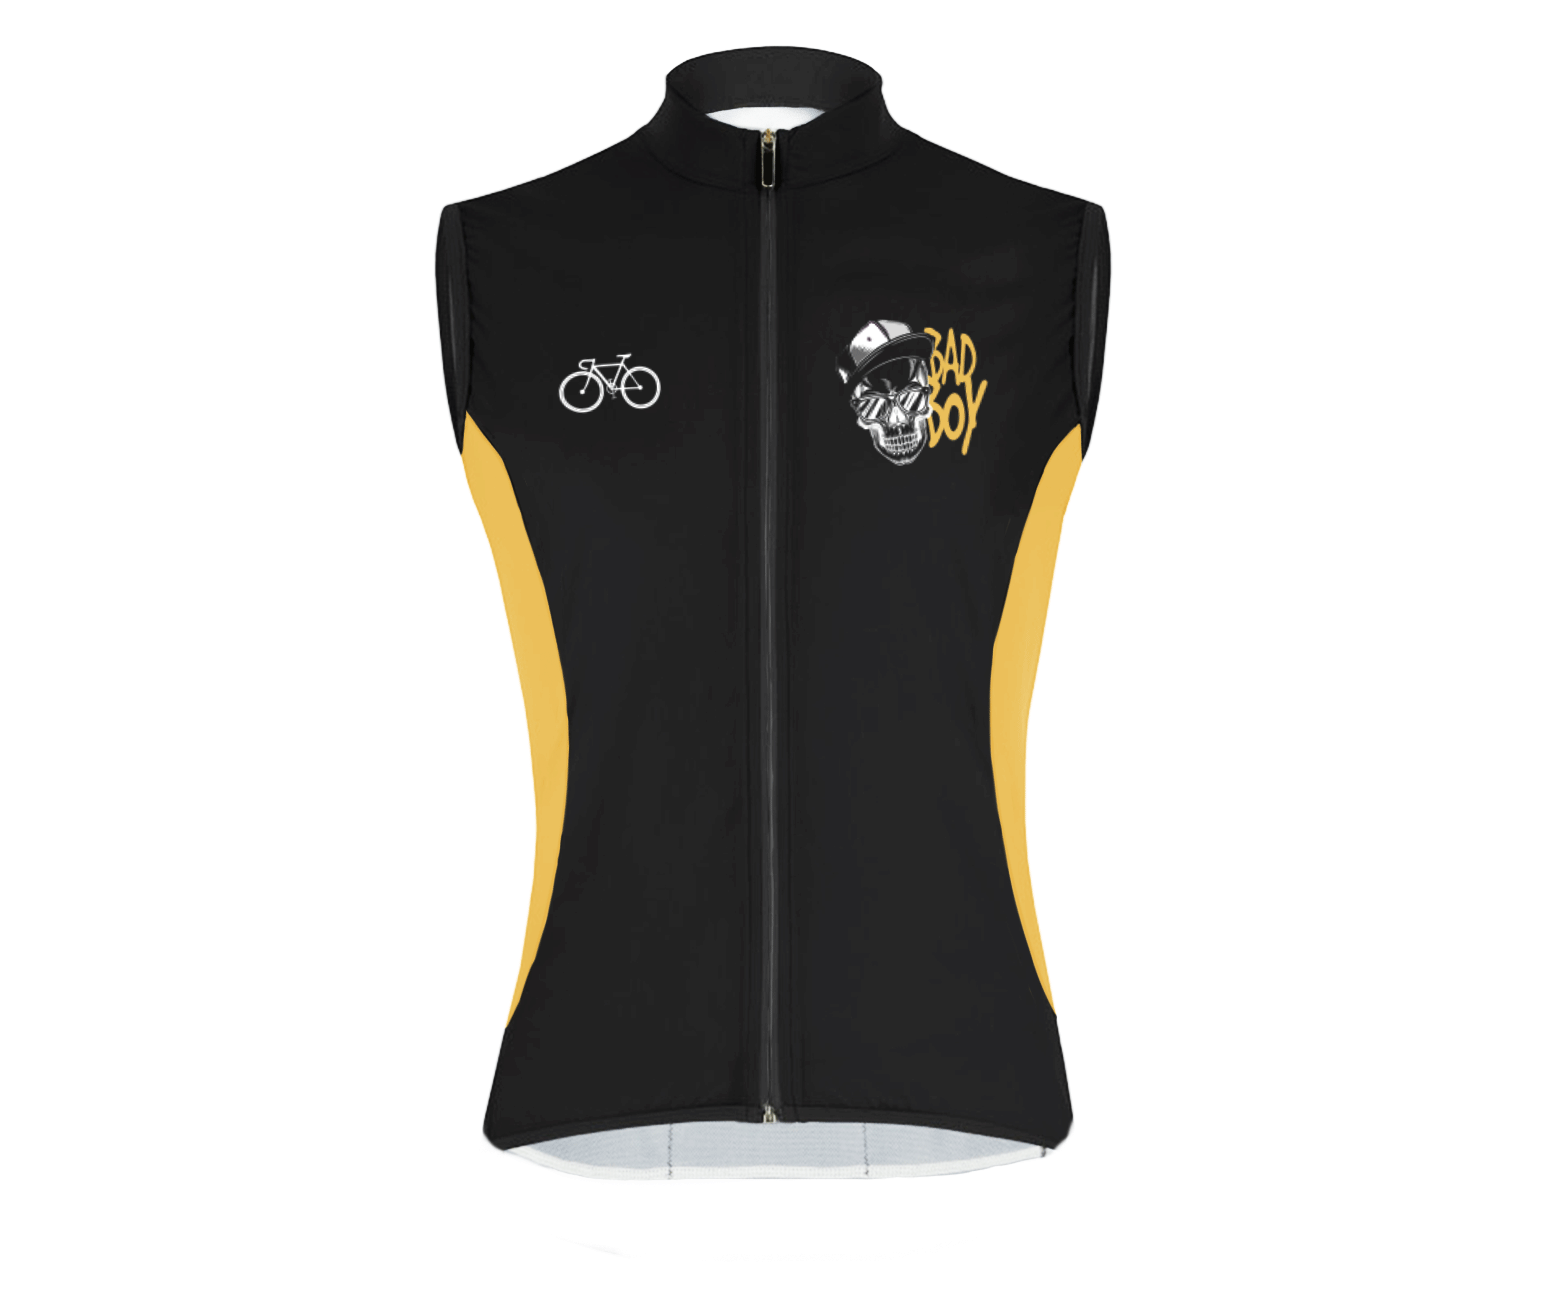 Cycling jersey without sleeves bad boy image 1